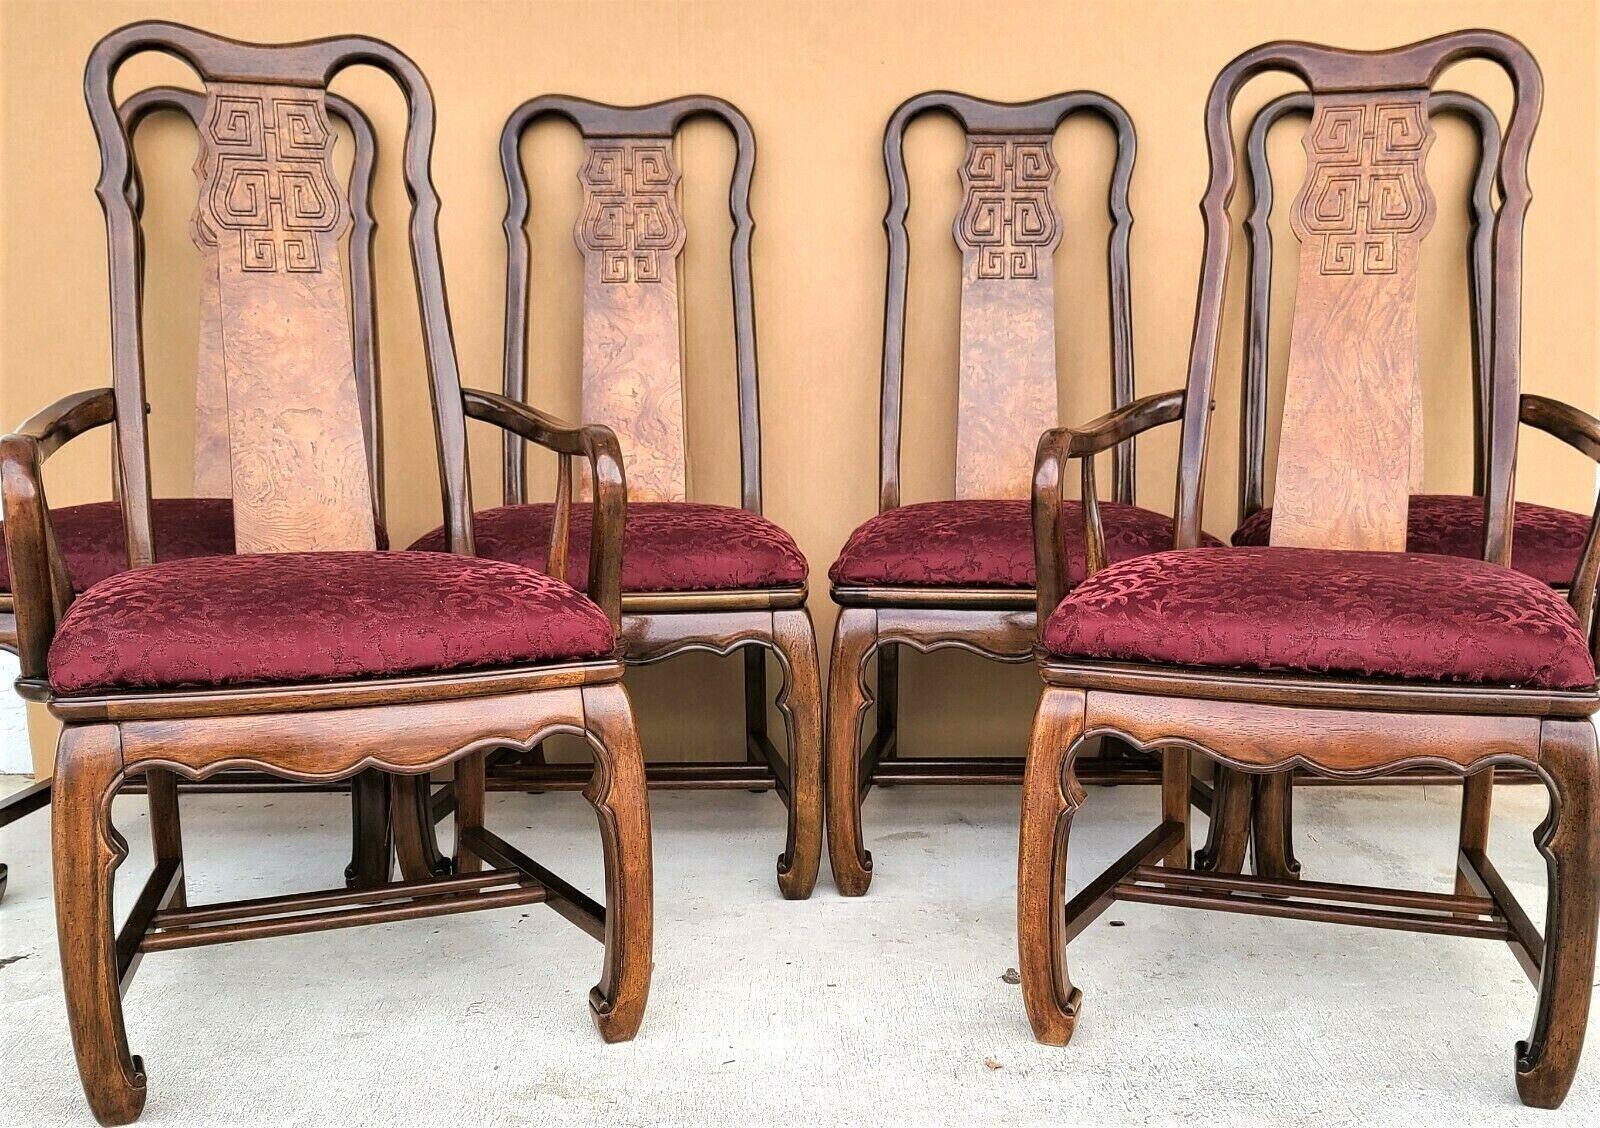 Set of (6) Asian Chinoiserie Ming Solid mahogany dining chairs by Universal Furniture
Set includes 2 arm and 4 side chairs

Approximate Measurements in Inches
Armchairs:
41